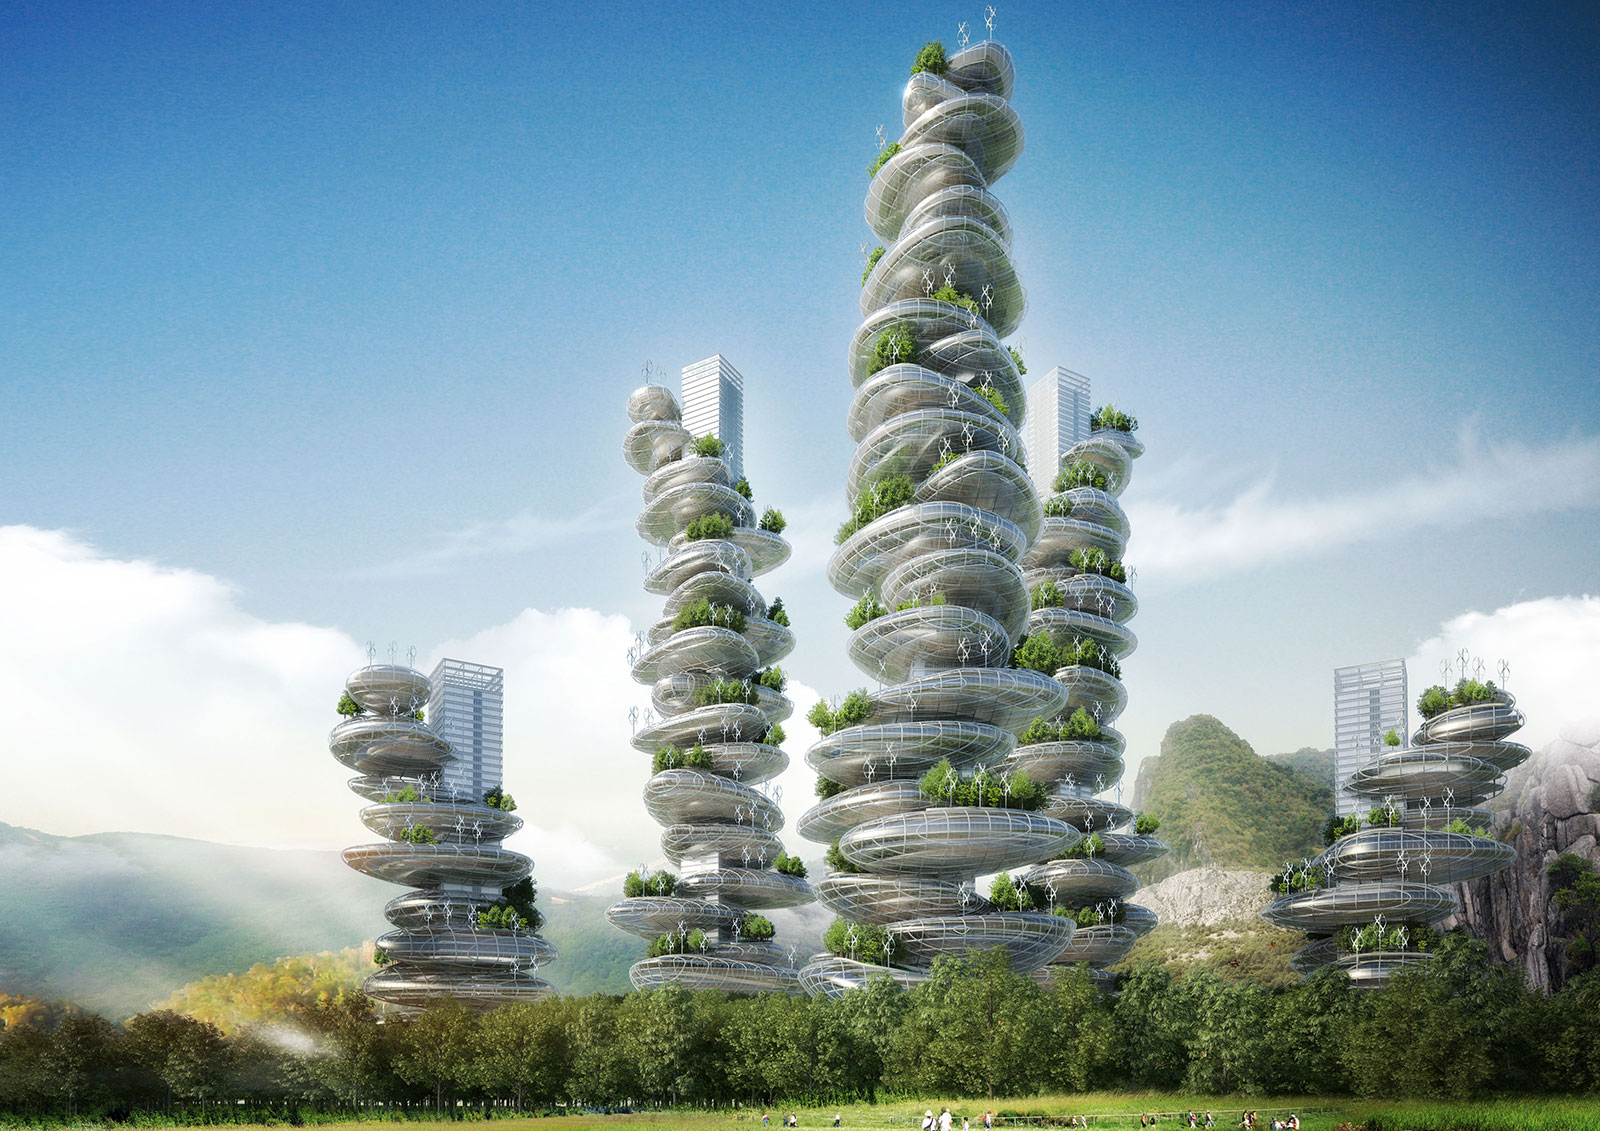 green architecture resembling cairns